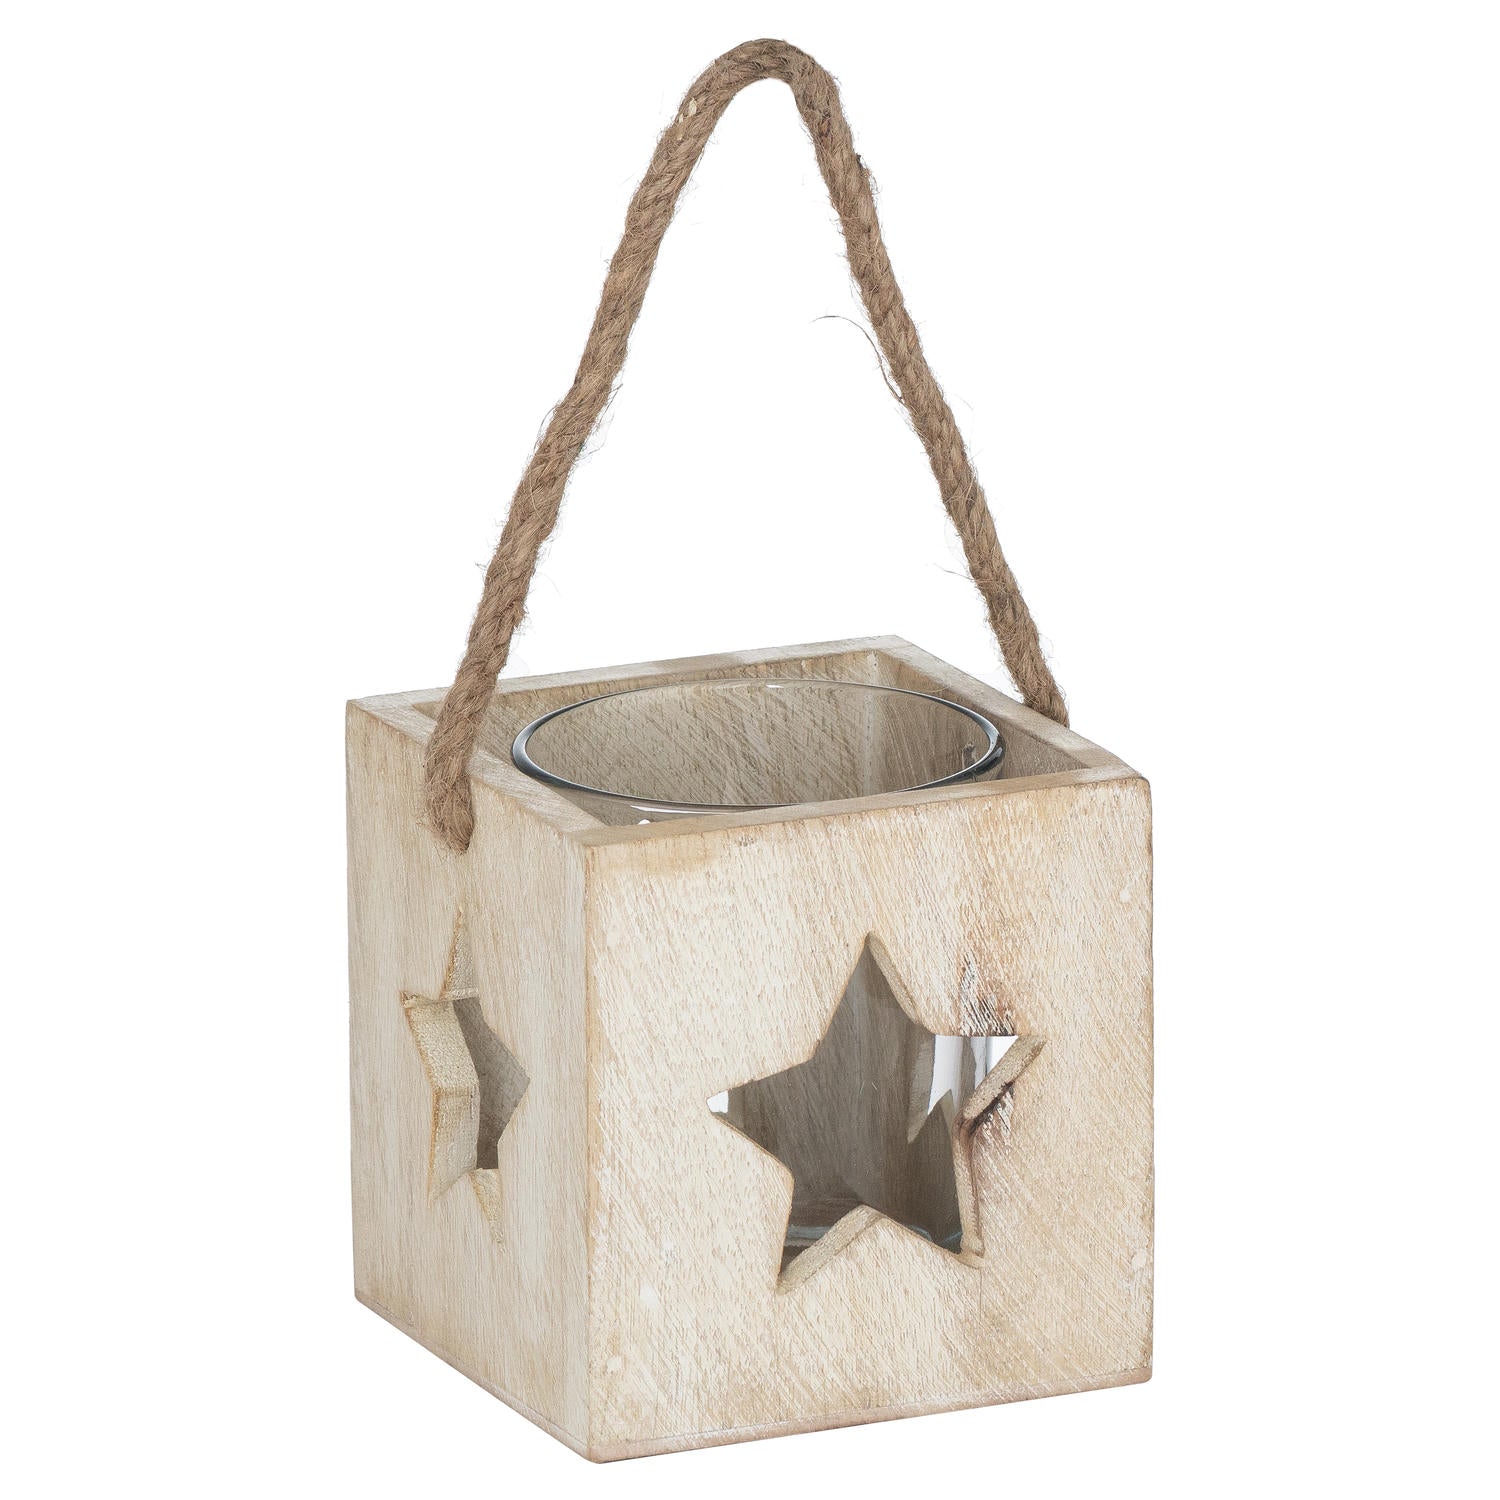 View Washed Wood Star Tealight Candle Holder information